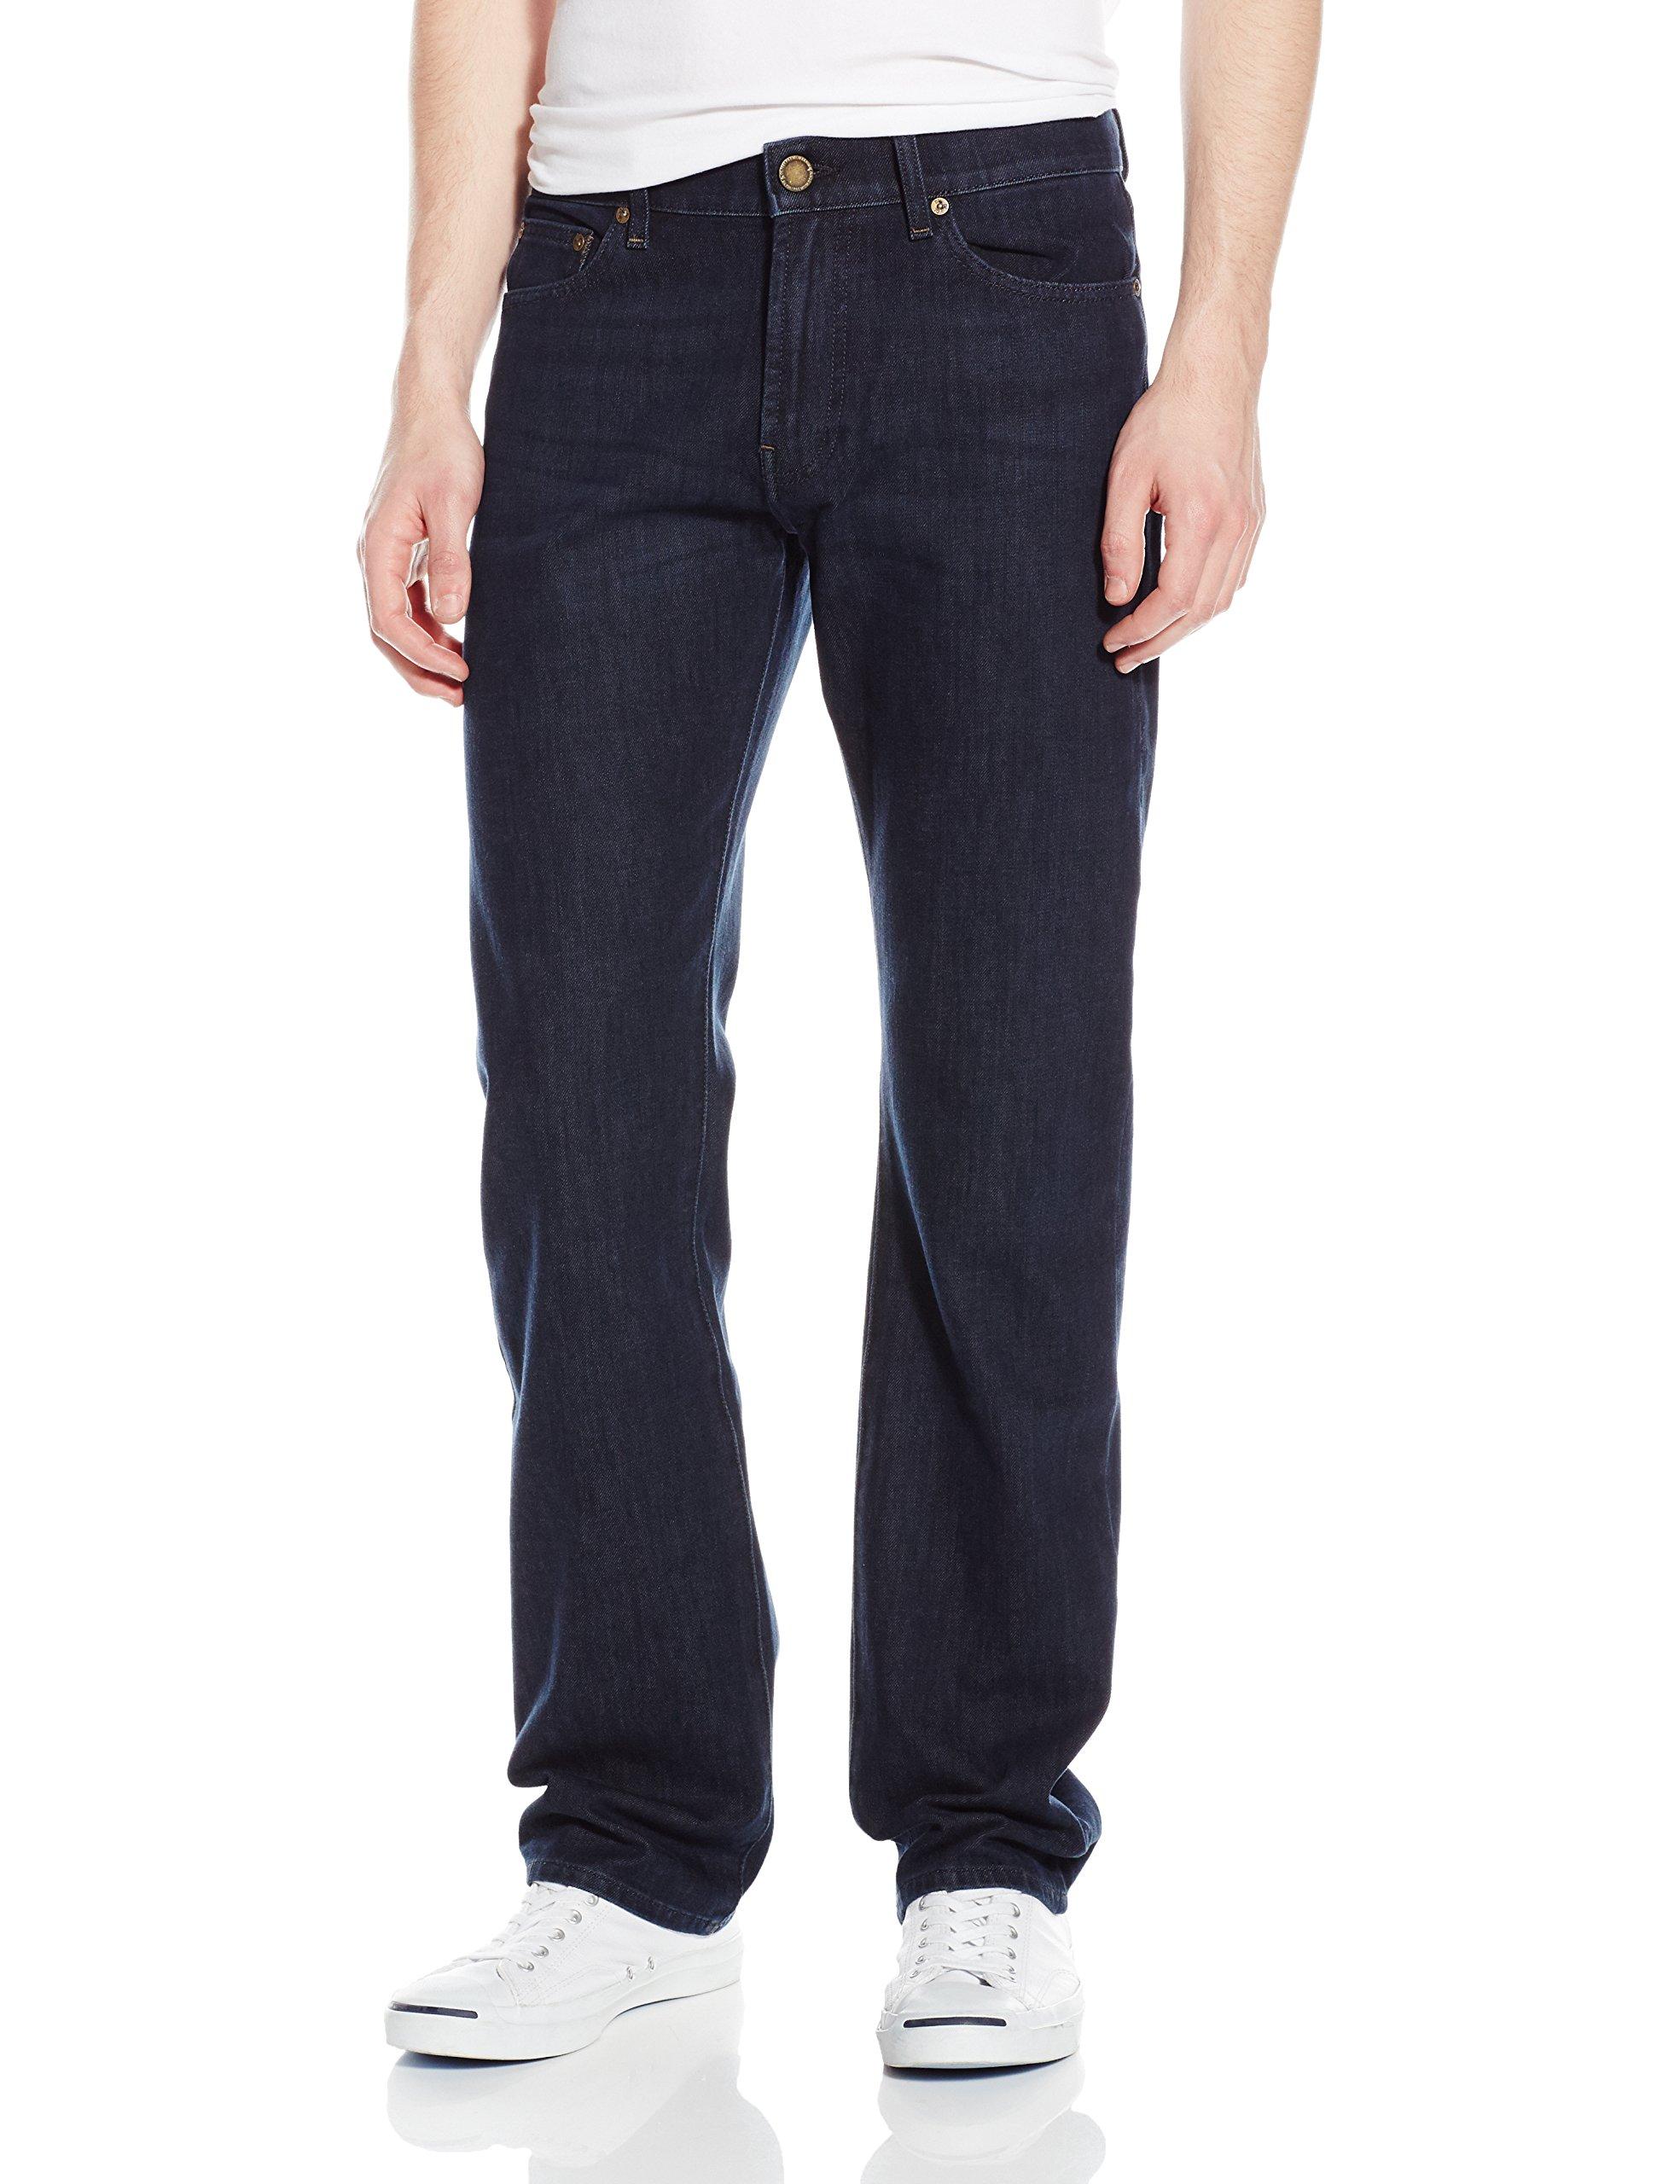 DL1961 Leather Vince Straight-leg Jeans in Blue for Men - Save 20% - Lyst